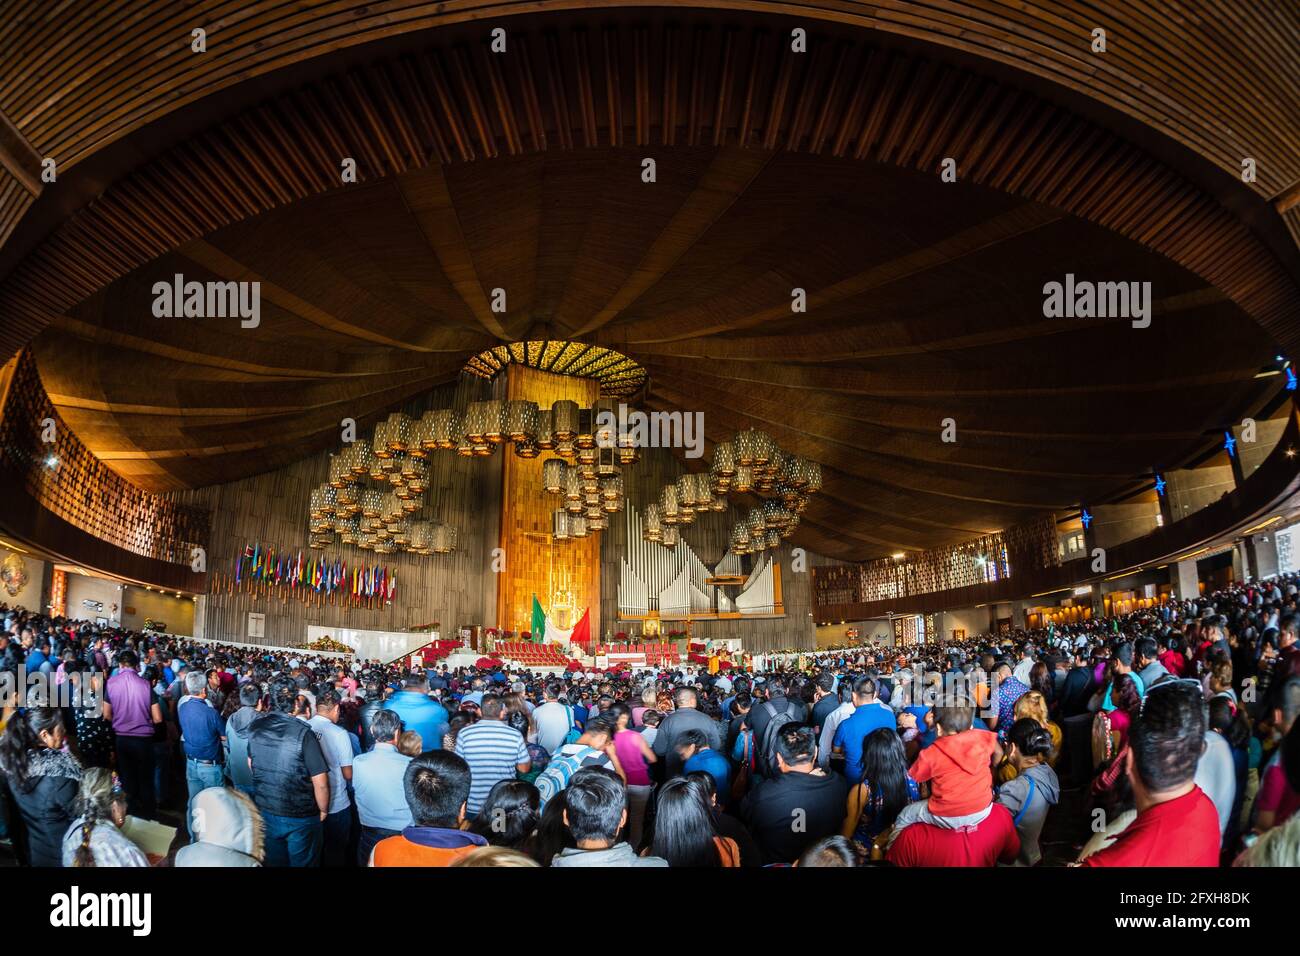 People gather during mass inside the famous Basilica of Our Lady of Guadalupe in Mexico City, Mexico. Stock Photo